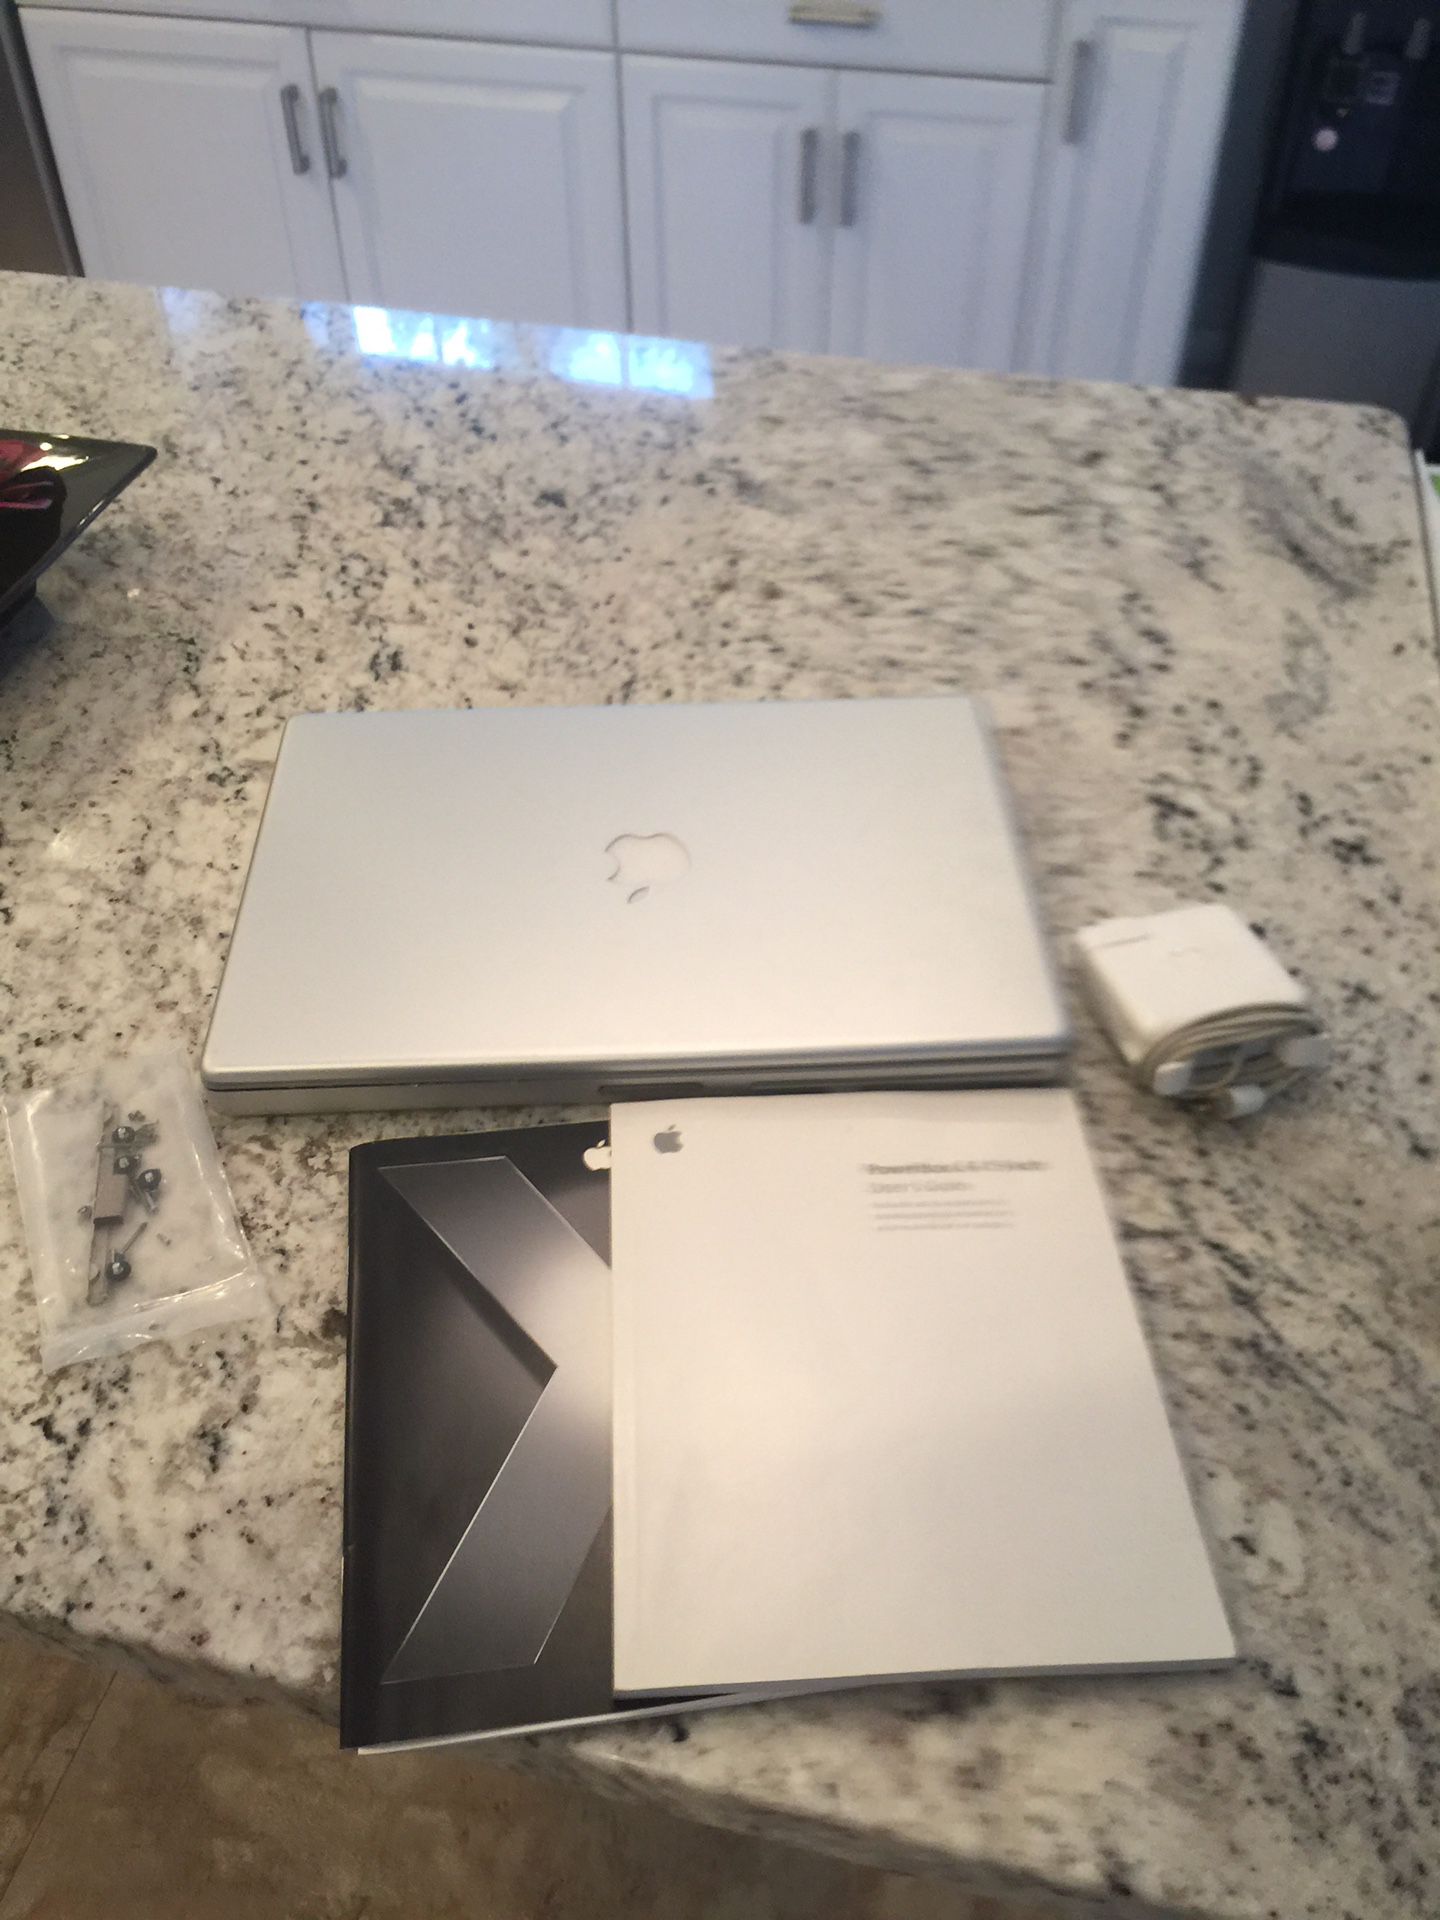 APPLE POWERBOOK G4 WITH CHARGER AND USER GUIDE